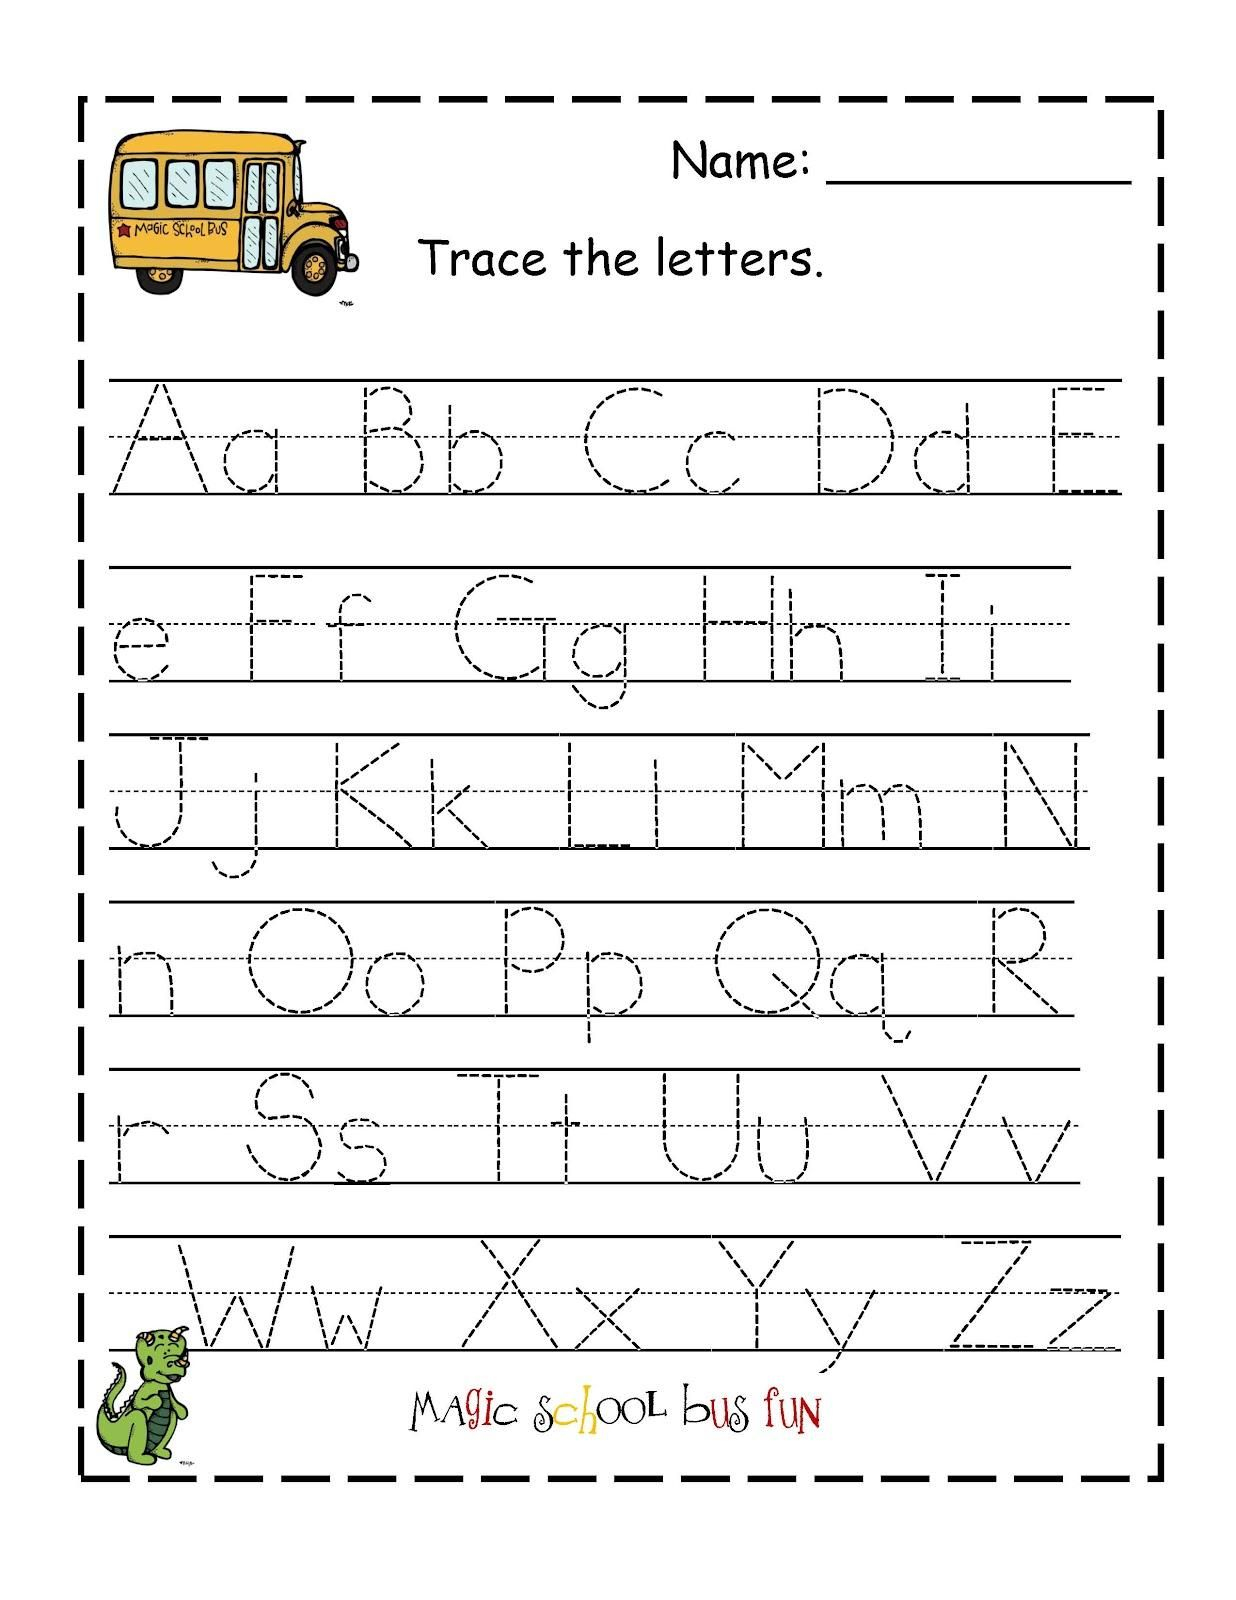 abcd-tracing-worksheet-425